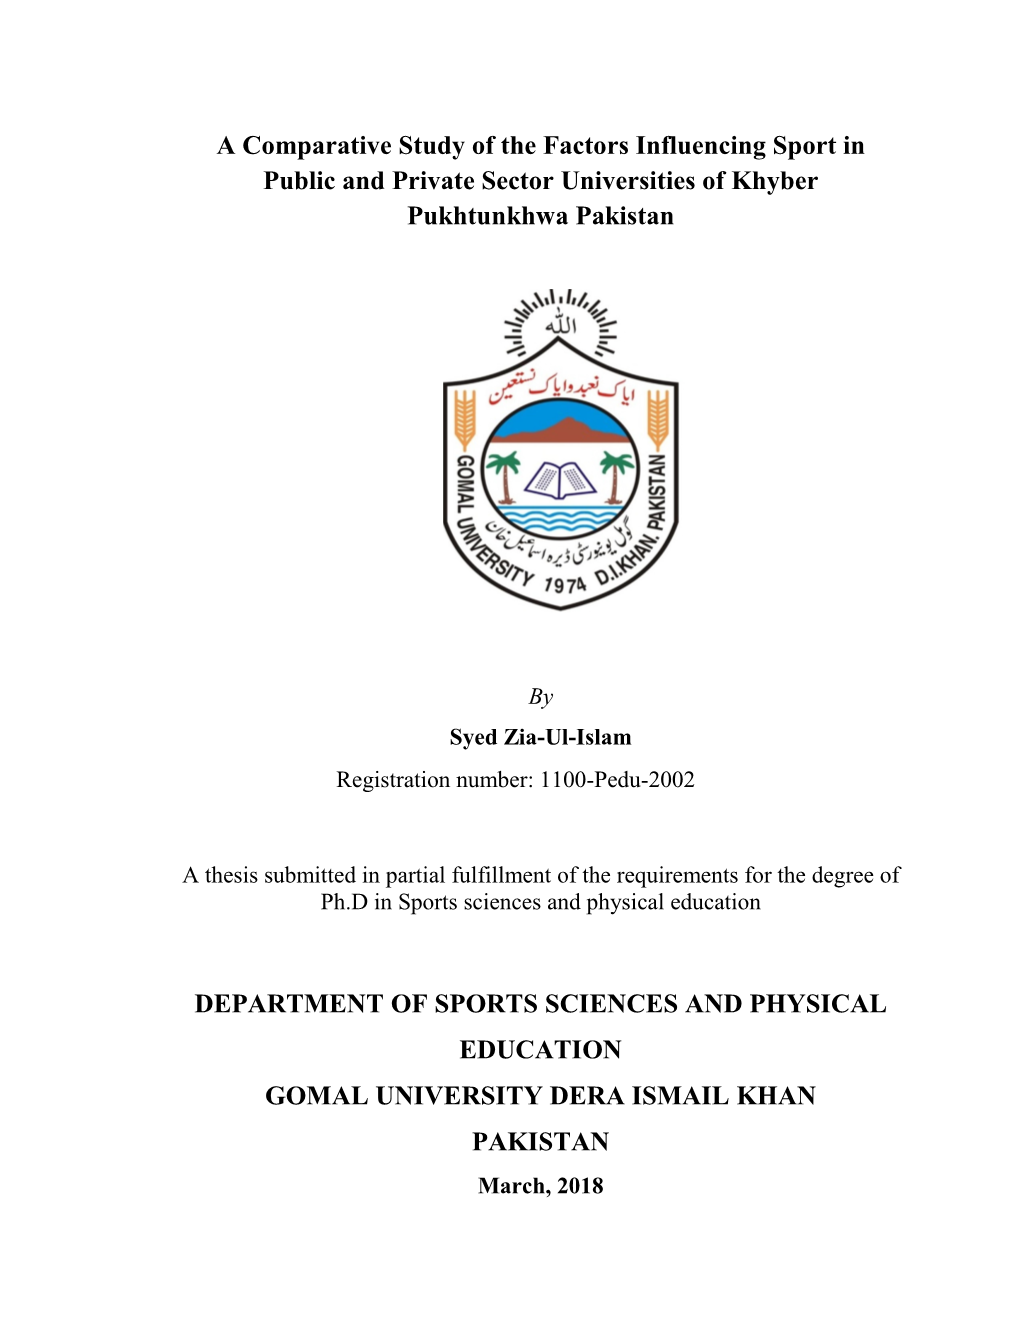 A Comparative Study of the Factors Influencing Sport in Public and Private Sector Universities of Khyber Pukhtunkhwa Pakistan DE